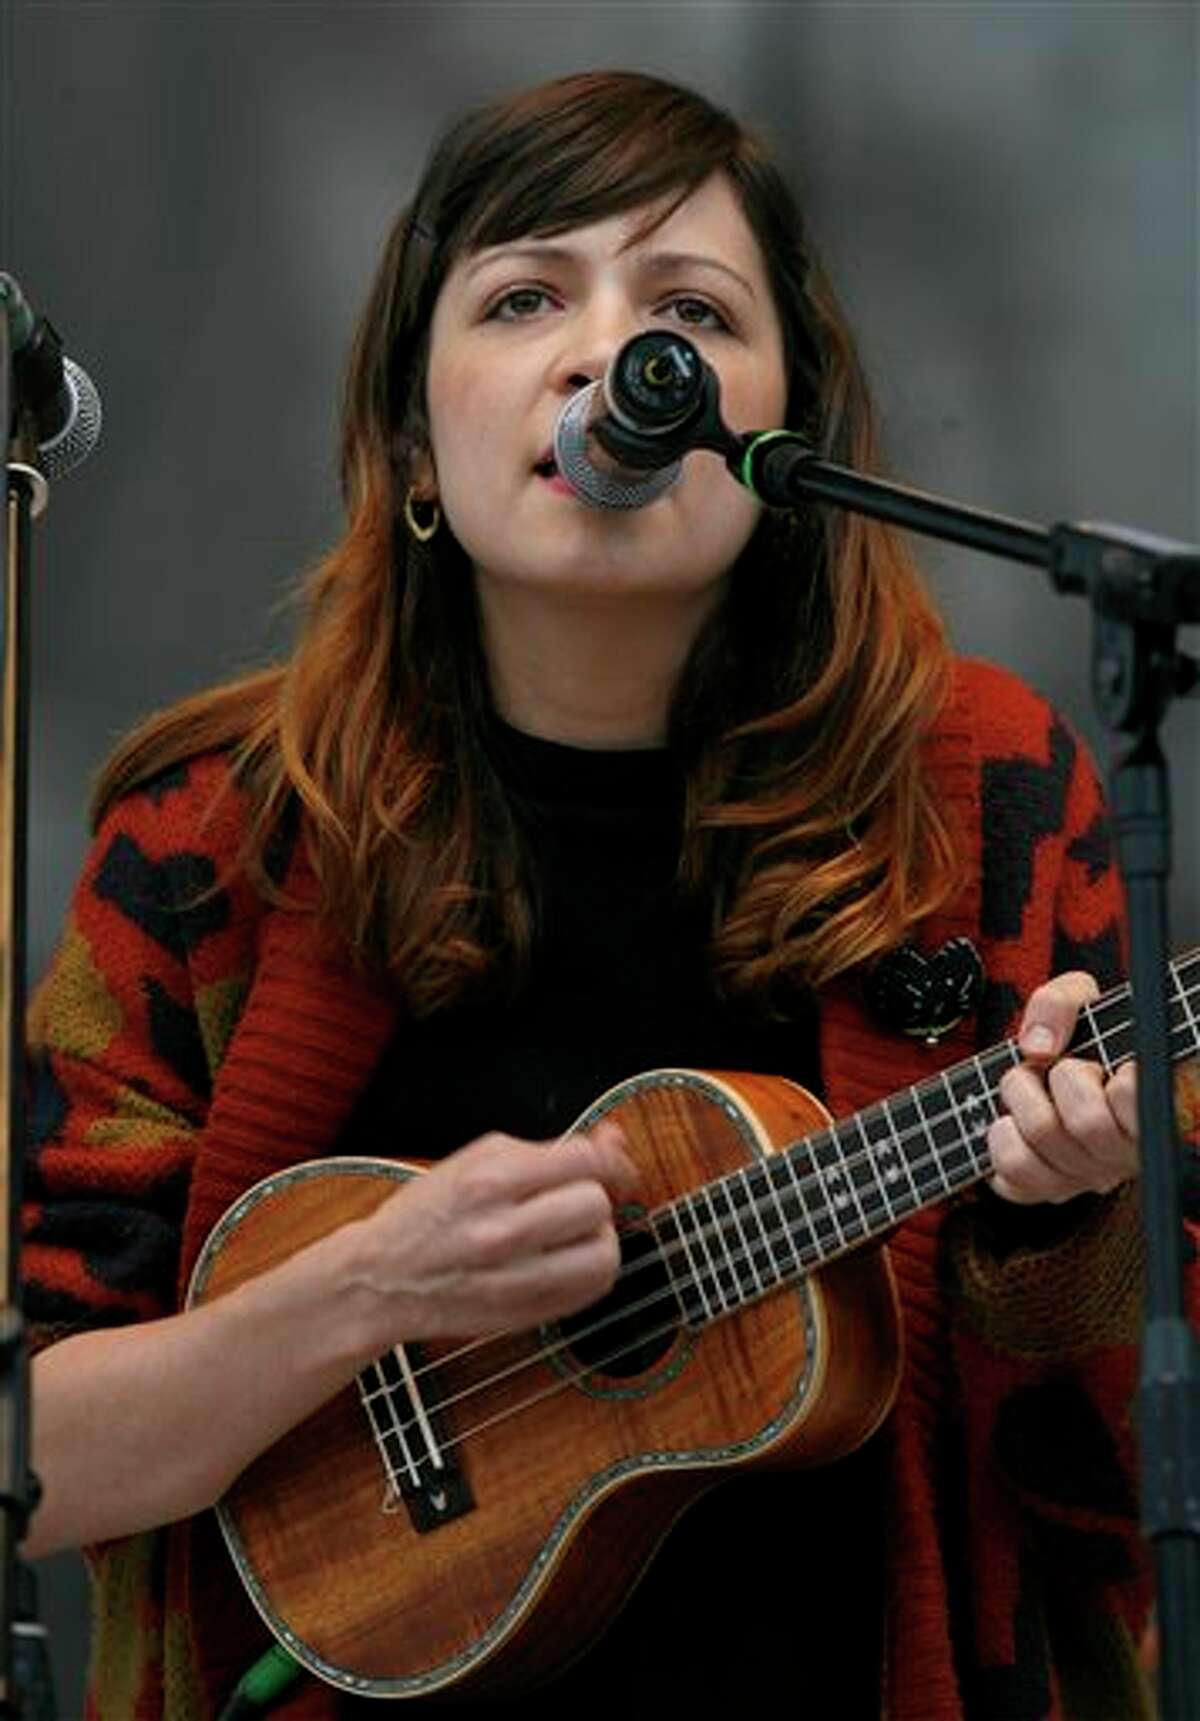 Mexican multimedia artist Natalia Lafourcade performs during a music festival in support of the student movement #YoSoy132, or I am 132 in Mexico City, Saturday June 16, 2012. #YoSoy132 is the name of a university movement that rejects the possible return of the old ruling Institutional Revolutionary Party (PRI) ahead of Mexico's July 1 presidential election. (AP Photo/Marco Ugarte)